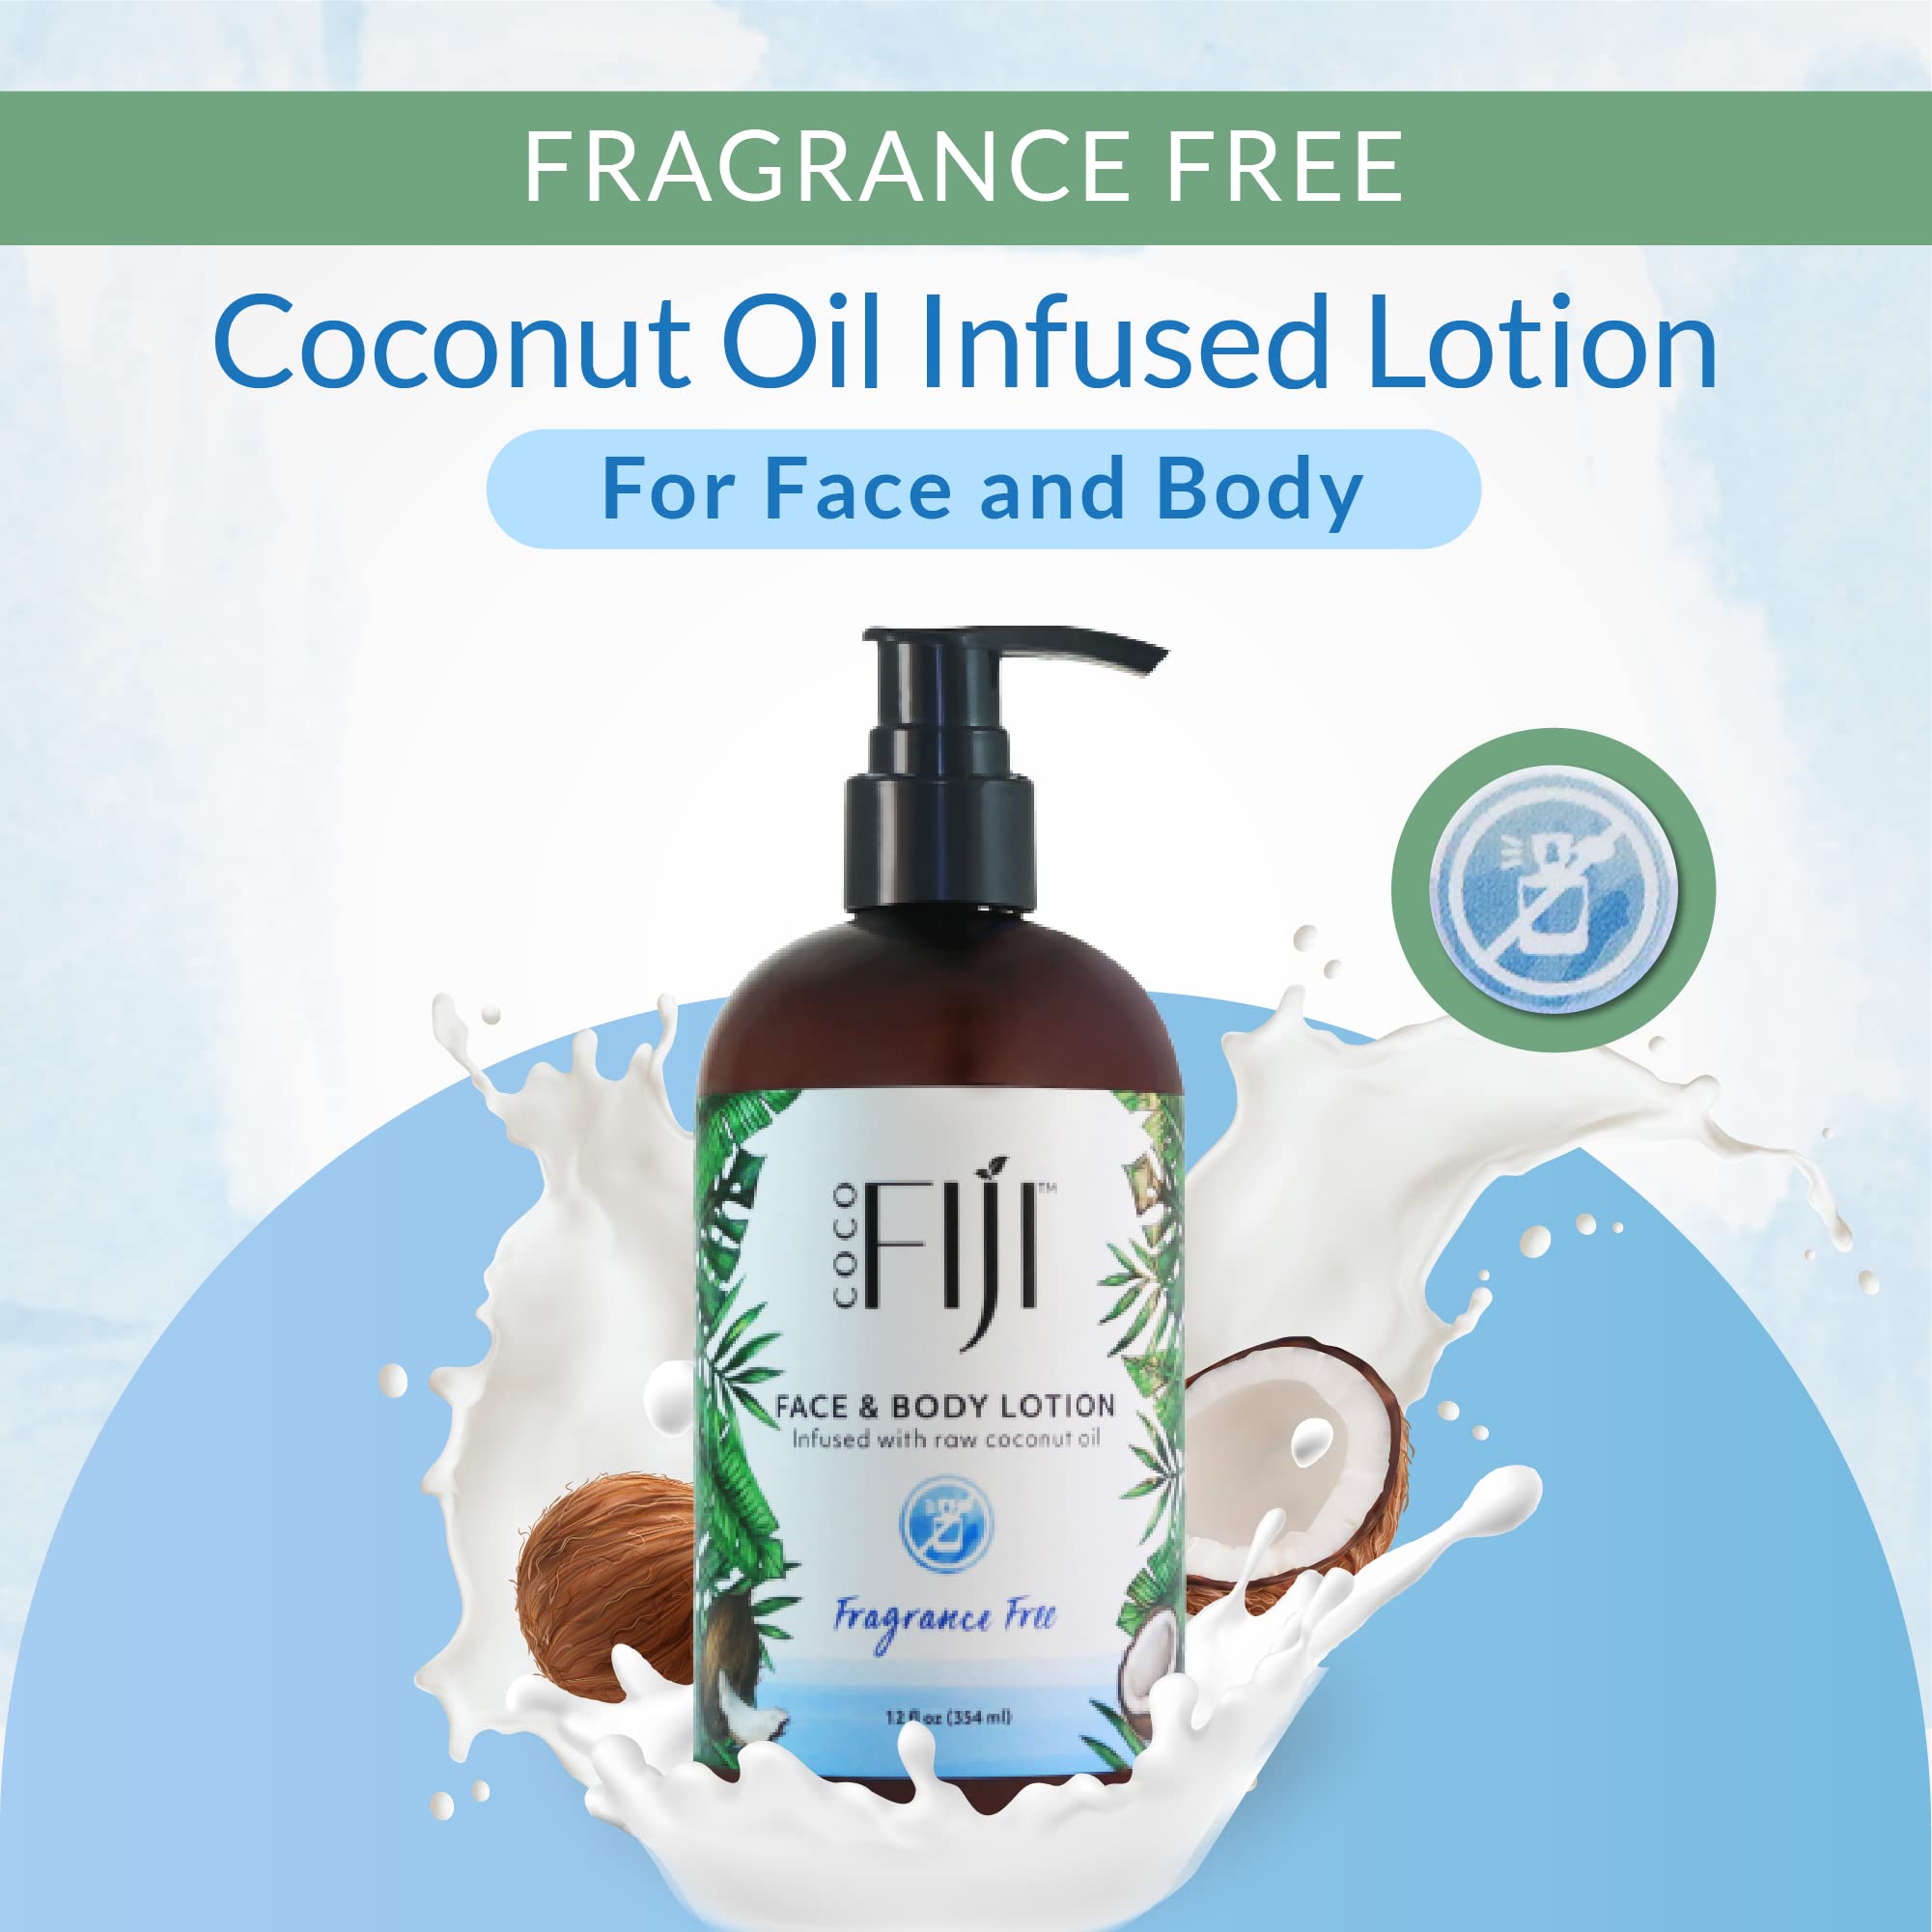 Coco Fiji Face & Body Lotion Infused With Coconut Oil | Lotion for Dry Skin | Moisturizer Face Cream & Massage Lotion for Women & Men | Fragrance Free 12 oz, Pack of 1